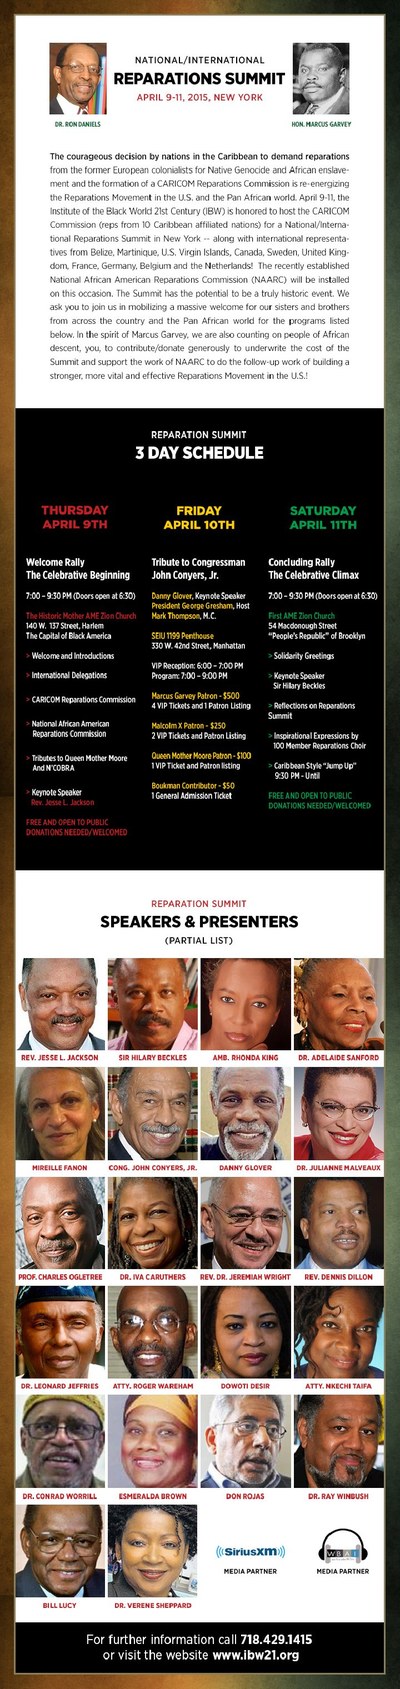 Participation in the Reparations Summit